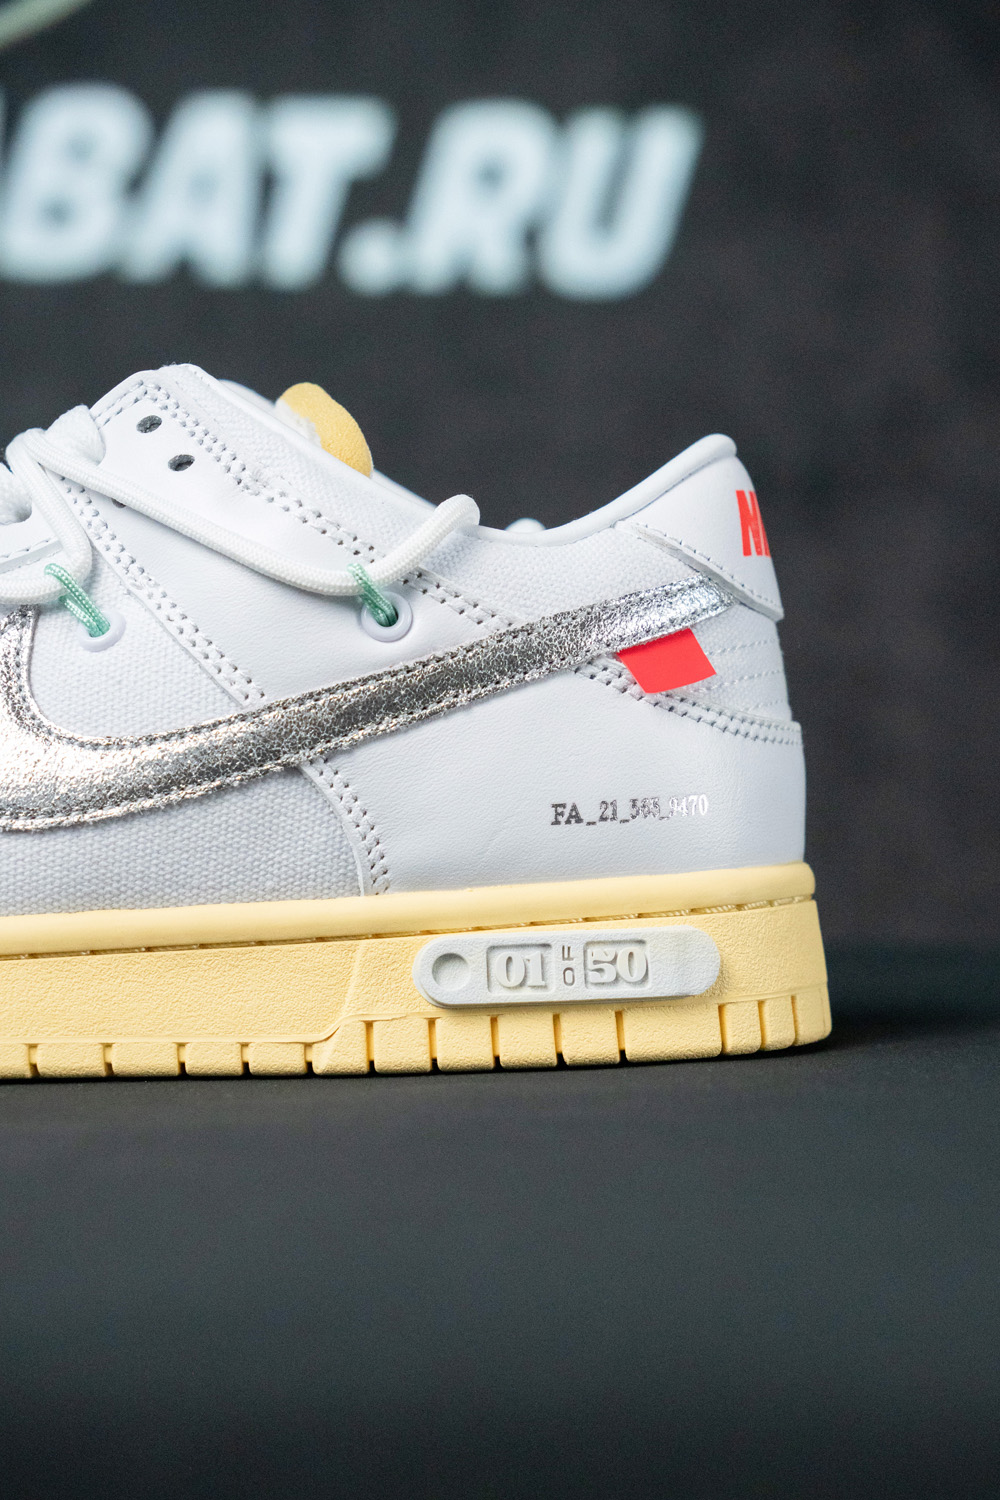 Off-White x Dunk Low 'Lot 01 of 50'